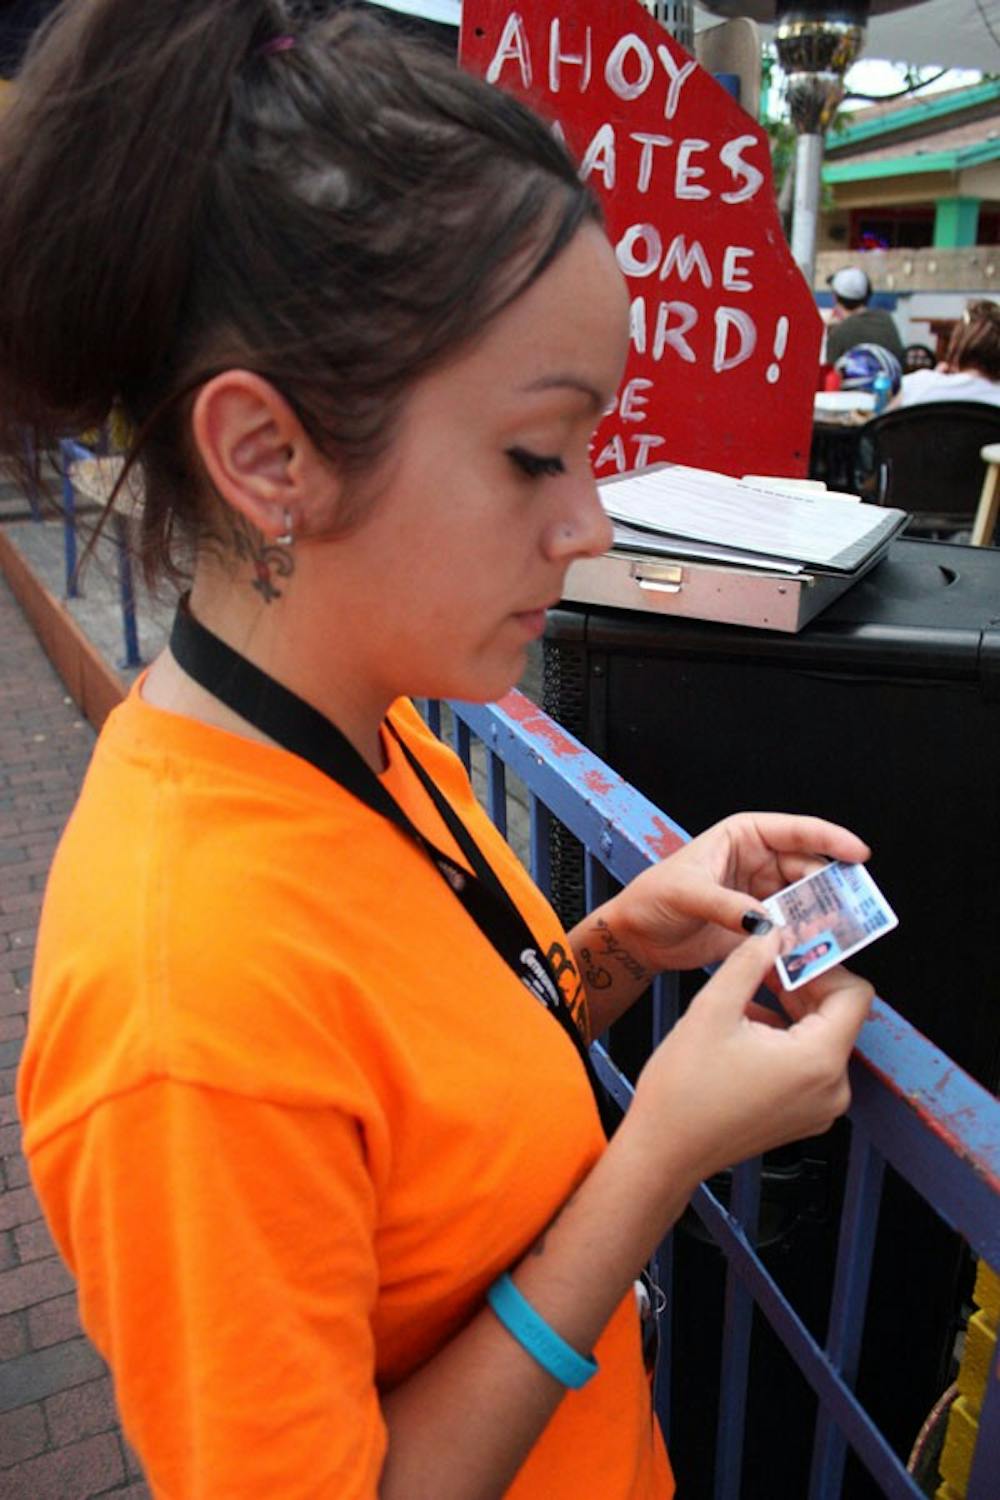 HARDER TO FAKE: Mallory Cuevas checks an I.D. at Barney's Boathouse in Tempe Monday evening. (Photo by Kyle Thompson)